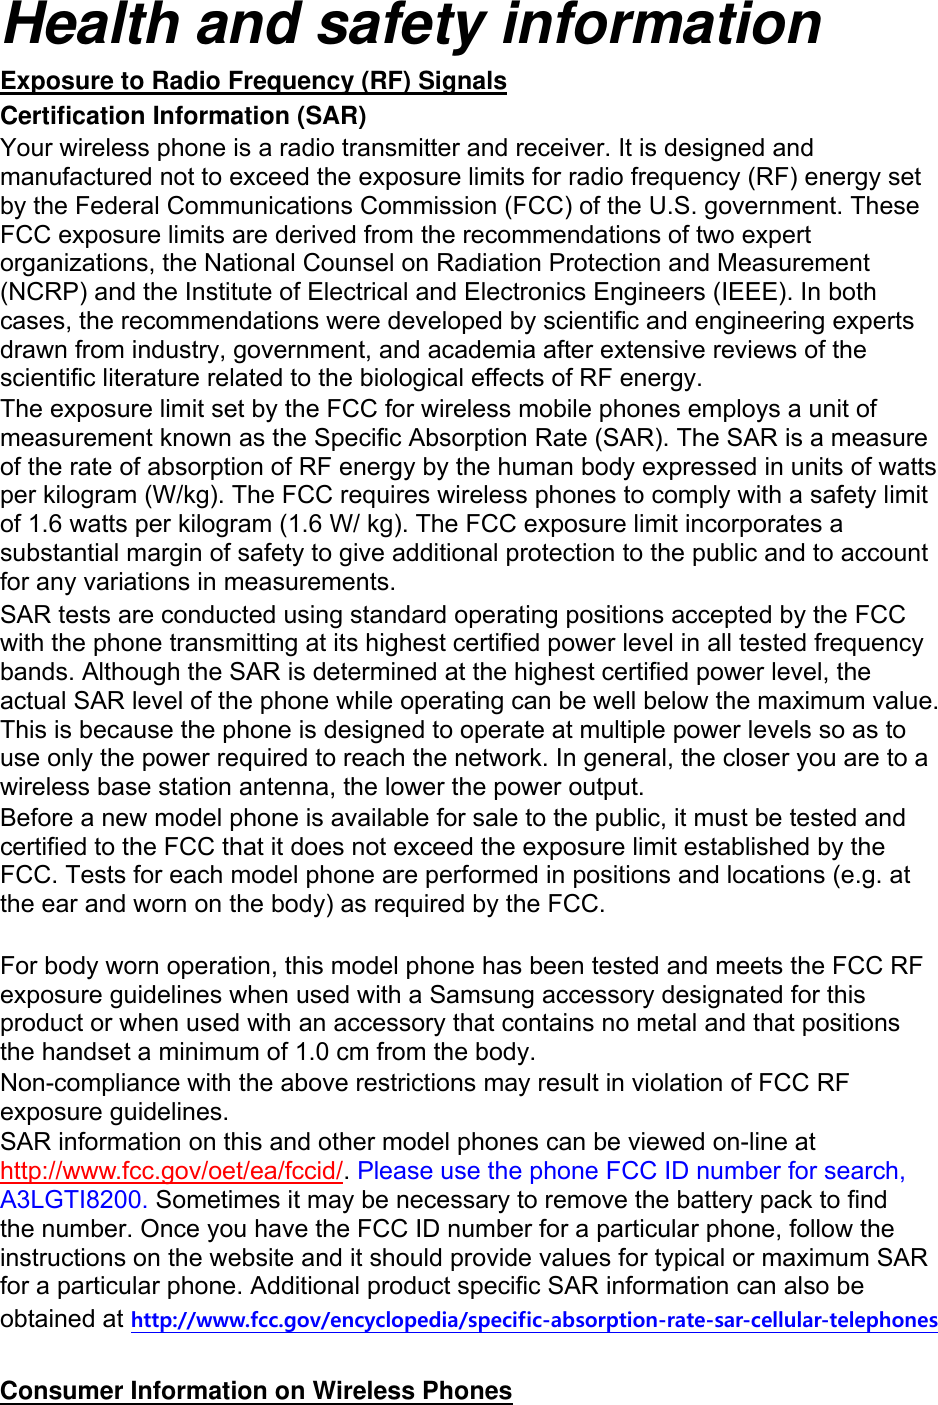 Health and safety information Exposure to Radio Frequency (RF) Signals Certification Information (SAR) Your wireless phone is a radio transmitter and receiver. It is designed and manufactured not to exceed the exposure limits for radio frequency (RF) energy set by the Federal Communications Commission (FCC) of the U.S. government. These FCC exposure limits are derived from the recommendations of two expert organizations, the National Counsel on Radiation Protection and Measurement (NCRP) and the Institute of Electrical and Electronics Engineers (IEEE). In both cases, the recommendations were developed by scientific and engineering experts drawn from industry, government, and academia after extensive reviews of the scientific literature related to the biological effects of RF energy. The exposure limit set by the FCC for wireless mobile phones employs a unit of measurement known as the Specific Absorption Rate (SAR). The SAR is a measure of the rate of absorption of RF energy by the human body expressed in units of watts per kilogram (W/kg). The FCC requires wireless phones to comply with a safety limit of 1.6 watts per kilogram (1.6 W/ kg). The FCC exposure limit incorporates a substantial margin of safety to give additional protection to the public and to account for any variations in measurements. SAR tests are conducted using standard operating positions accepted by the FCC with the phone transmitting at its highest certified power level in all tested frequency bands. Although the SAR is determined at the highest certified power level, the actual SAR level of the phone while operating can be well below the maximum value. This is because the phone is designed to operate at multiple power levels so as to use only the power required to reach the network. In general, the closer you are to a wireless base station antenna, the lower the power output. Before a new model phone is available for sale to the public, it must be tested and certified to the FCC that it does not exceed the exposure limit established by the FCC. Tests for each model phone are performed in positions and locations (e.g. at the ear and worn on the body) as required by the FCC.      For body worn operation, this model phone has been tested and meets the FCC RF exposure guidelines when used with a Samsung accessory designated for this product or when used with an accessory that contains no metal and that positions the handset a minimum of 1.0 cm from the body.   Non-compliance with the above restrictions may result in violation of FCC RF exposure guidelines. SAR information on this and other model phones can be viewed on-line at http://www.fcc.gov/oet/ea/fccid/. Please use the phone FCC ID number for search, A3LGTI8200. Sometimes it may be necessary to remove the battery pack to find the number. Once you have the FCC ID number for a particular phone, follow the instructions on the website and it should provide values for typical or maximum SAR for a particular phone. Additional product specific SAR information can also be obtained at http://www.fcc.gov/encyclopedia/specific-absorption-rate-sar-cellular-telephones  Consumer Information on Wireless Phones 